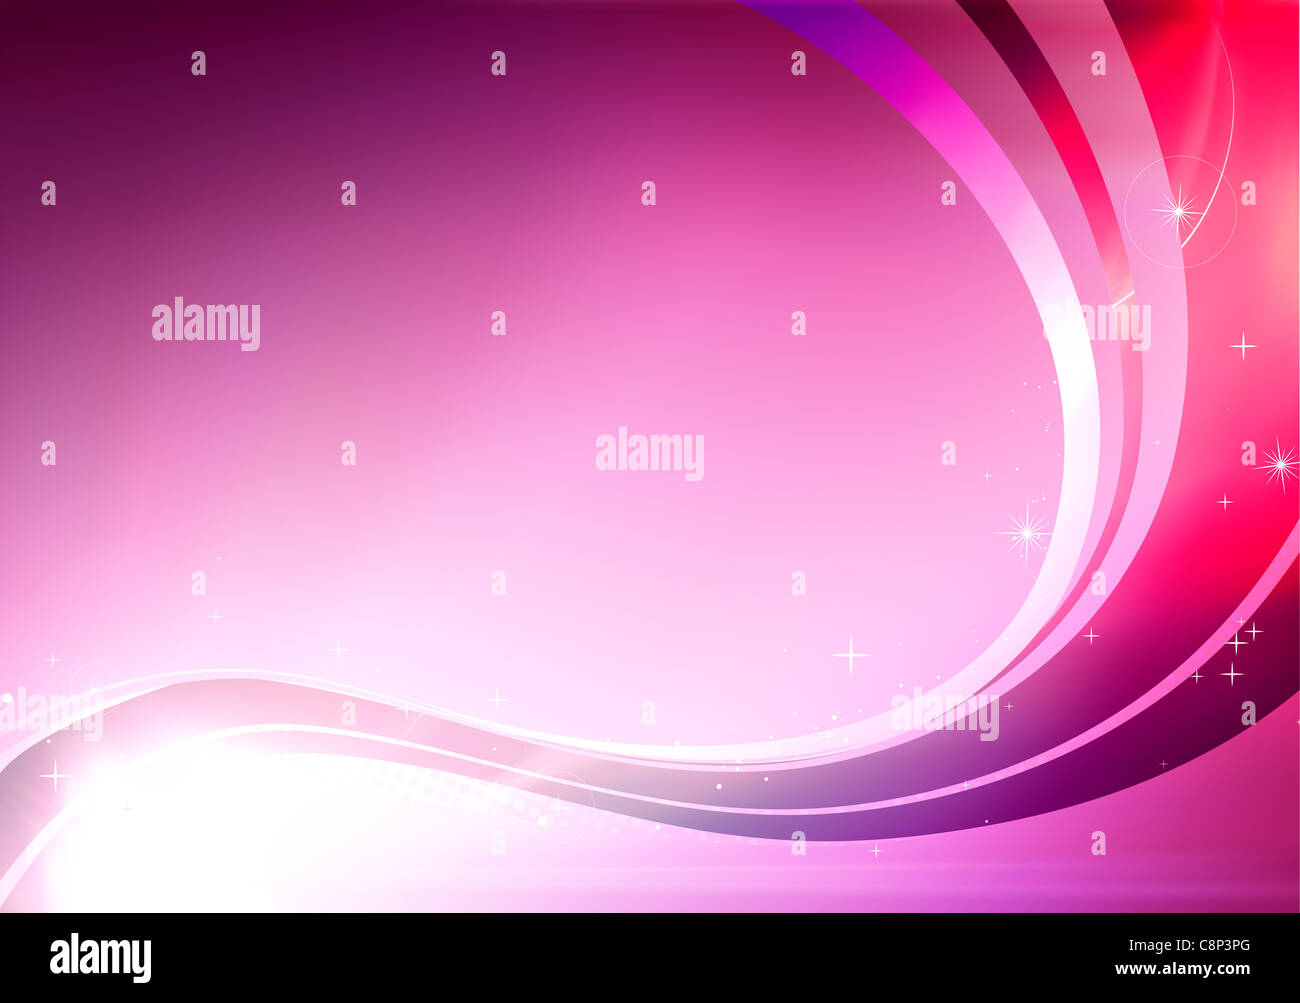 illustration of pink abstract background made of light splashes and curved lines Stock Photo